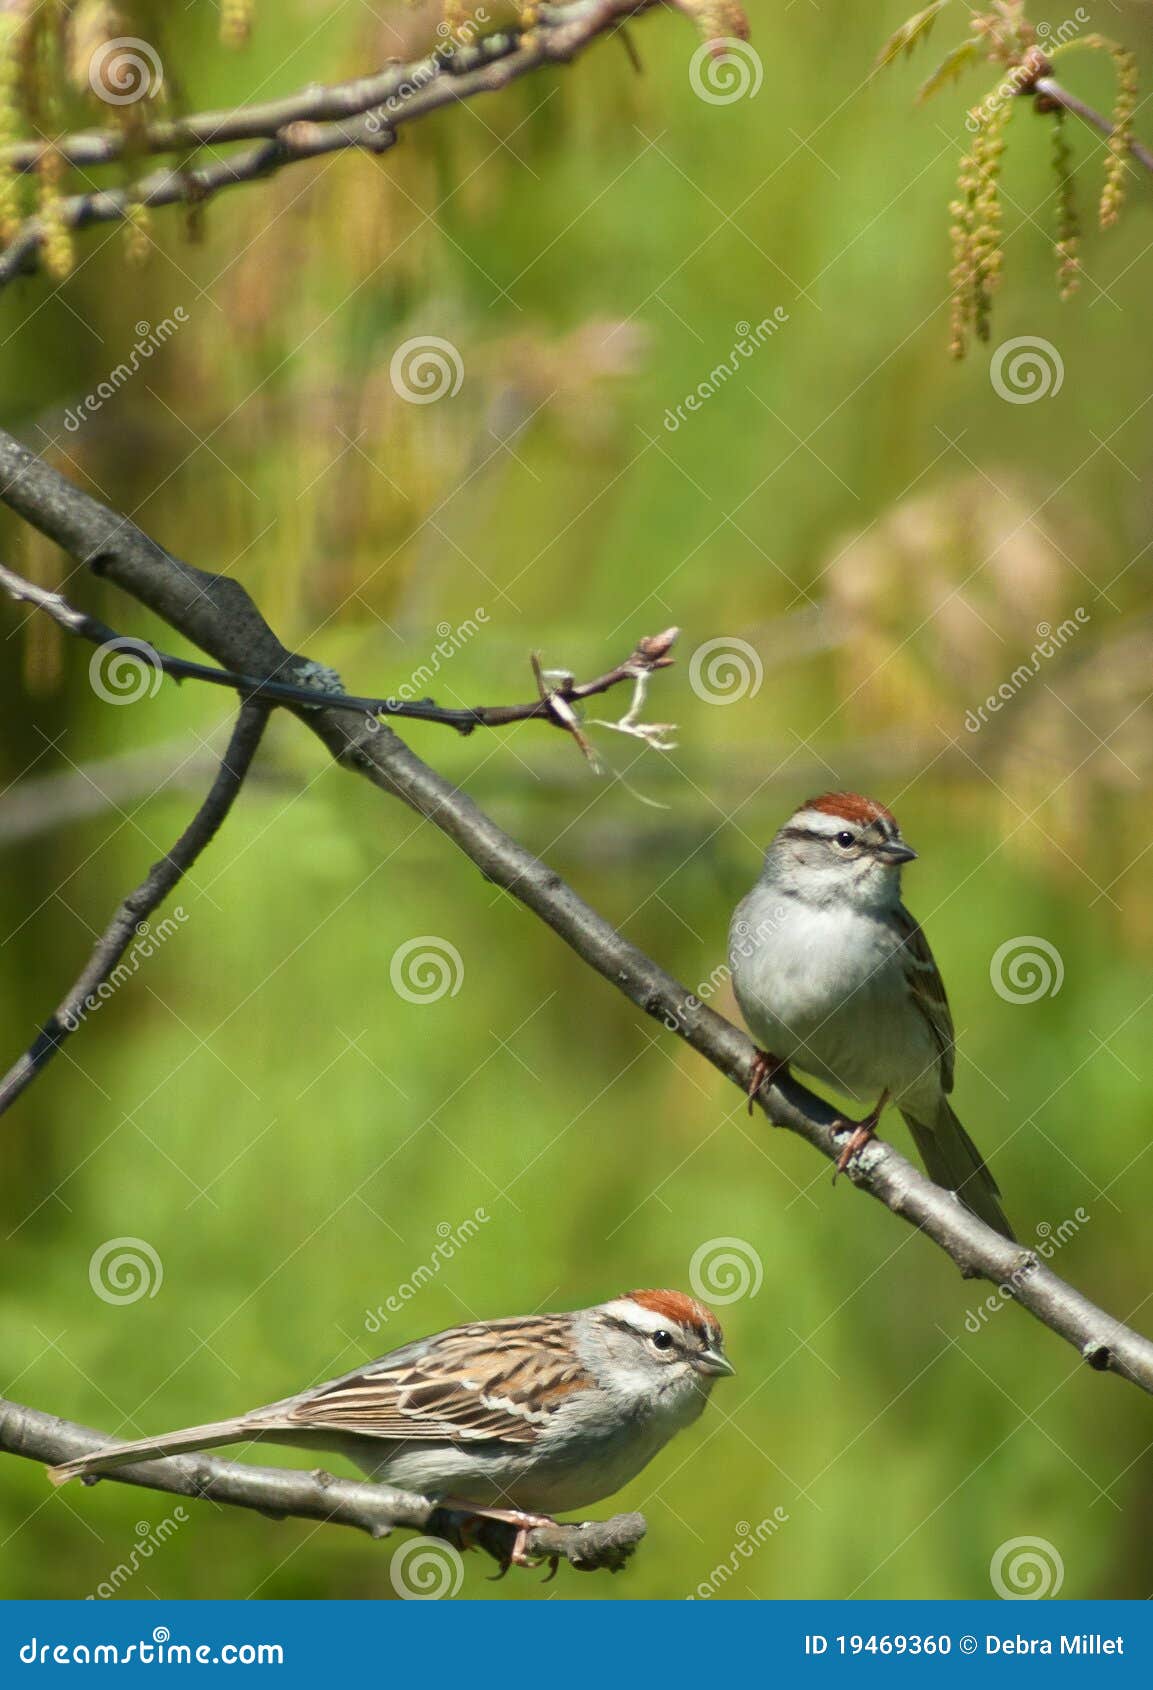 two chipping sparrows